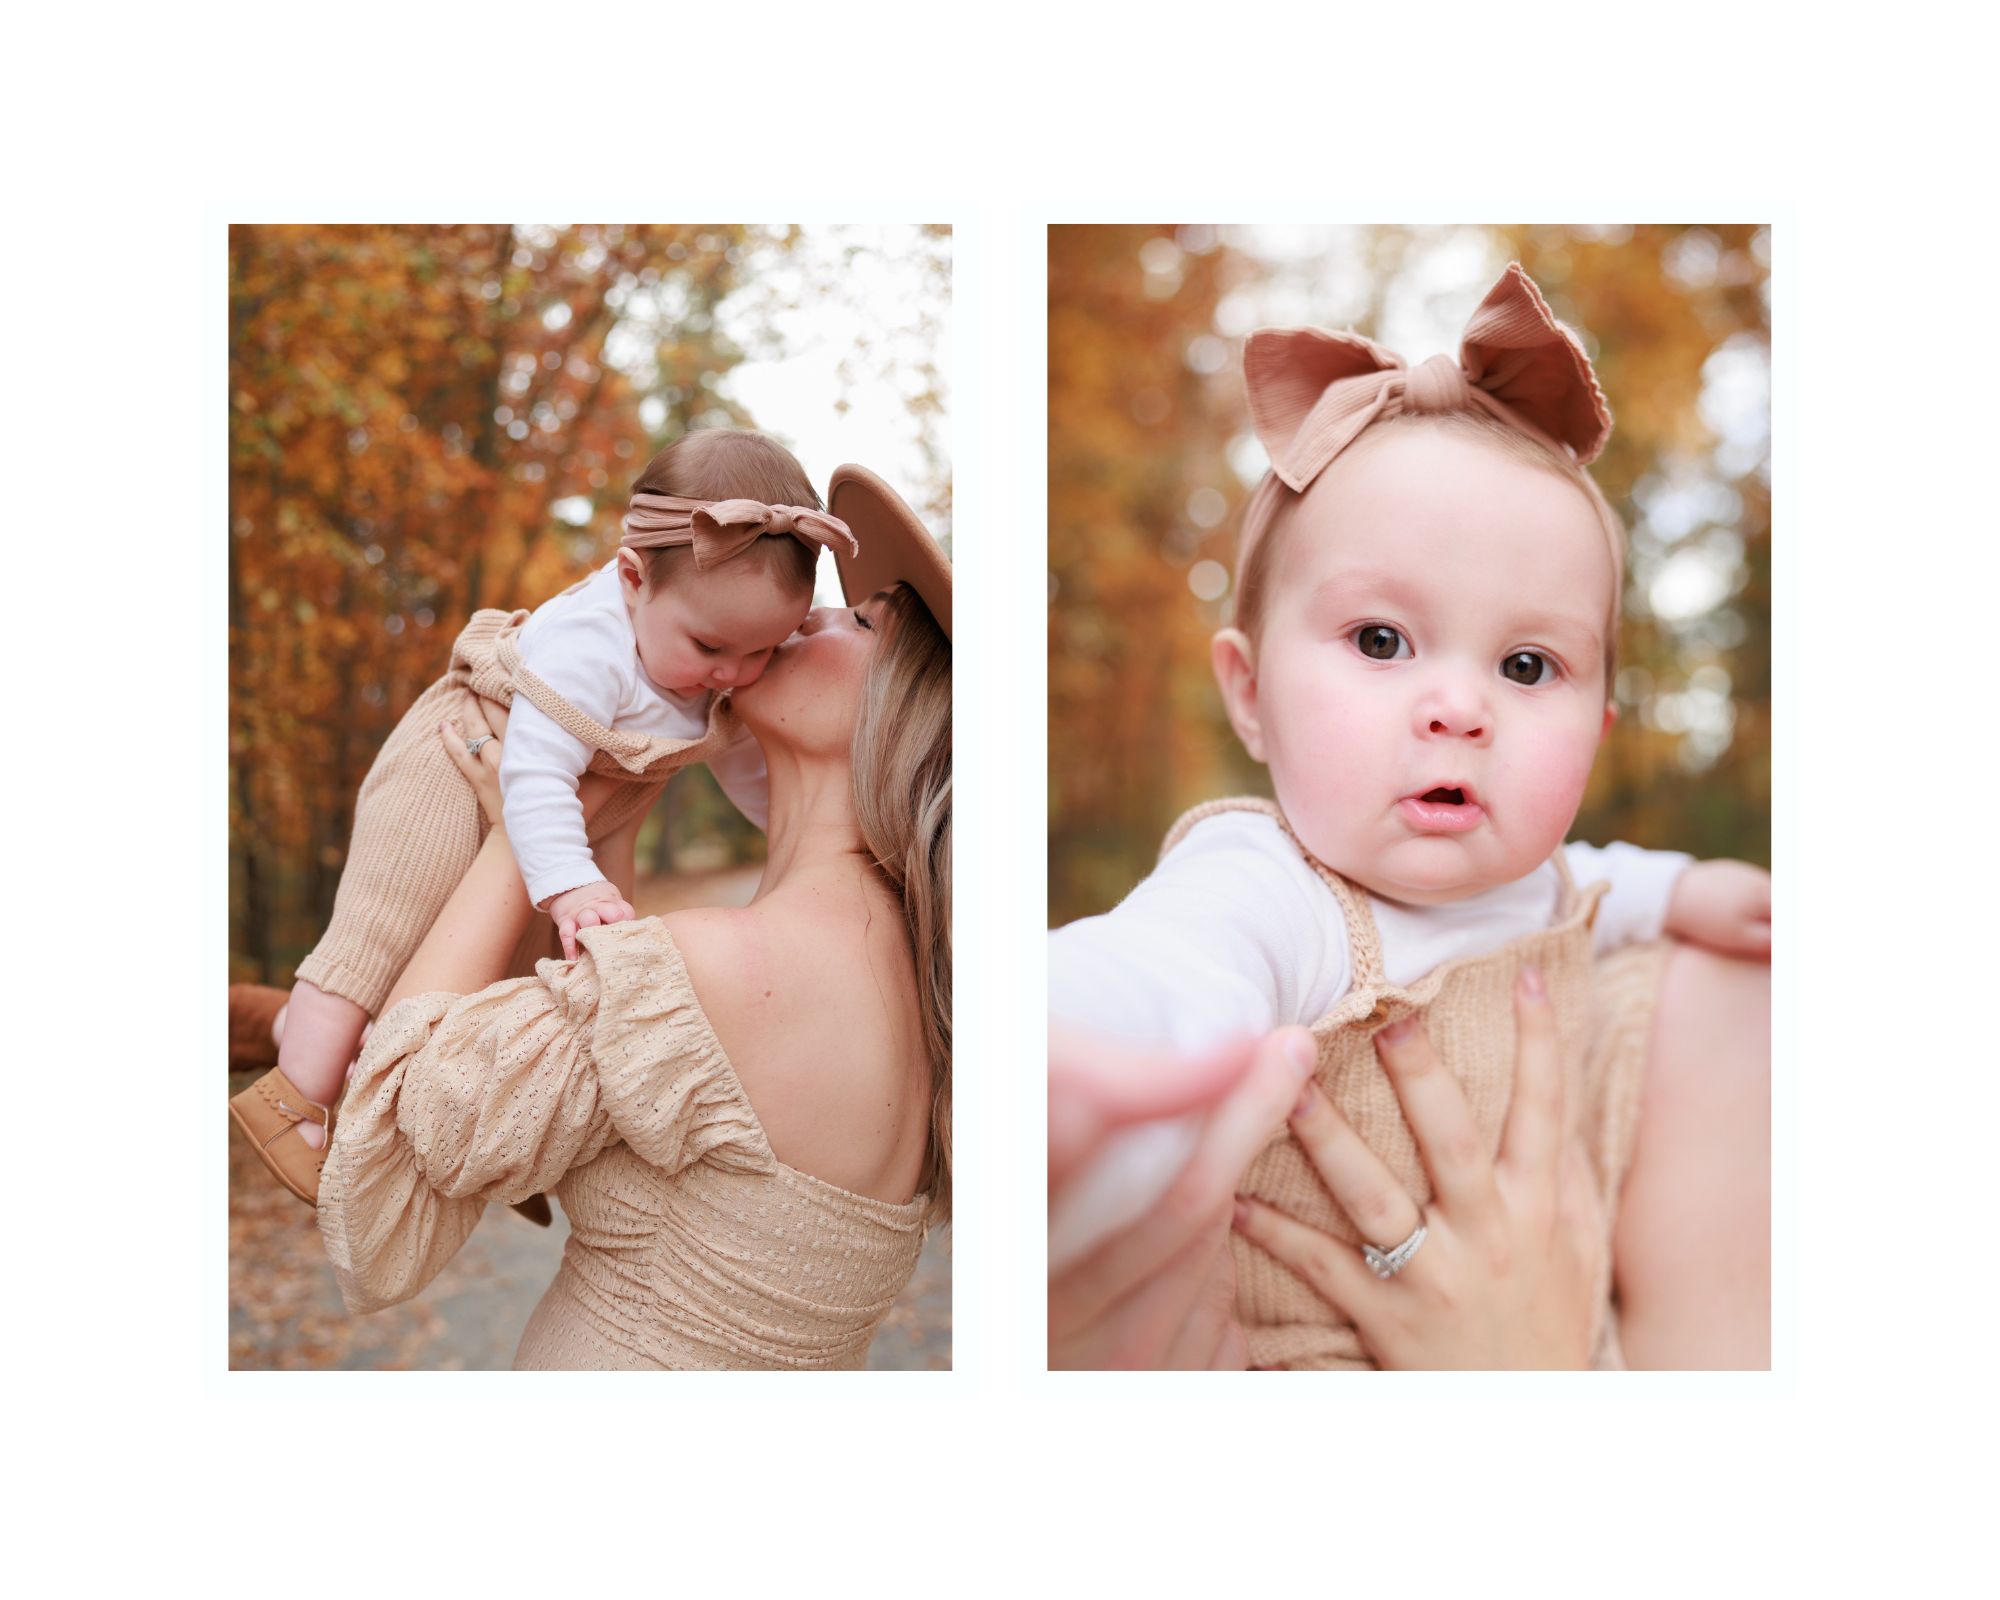 Mom kissing her baby in their outdoor family photography session.